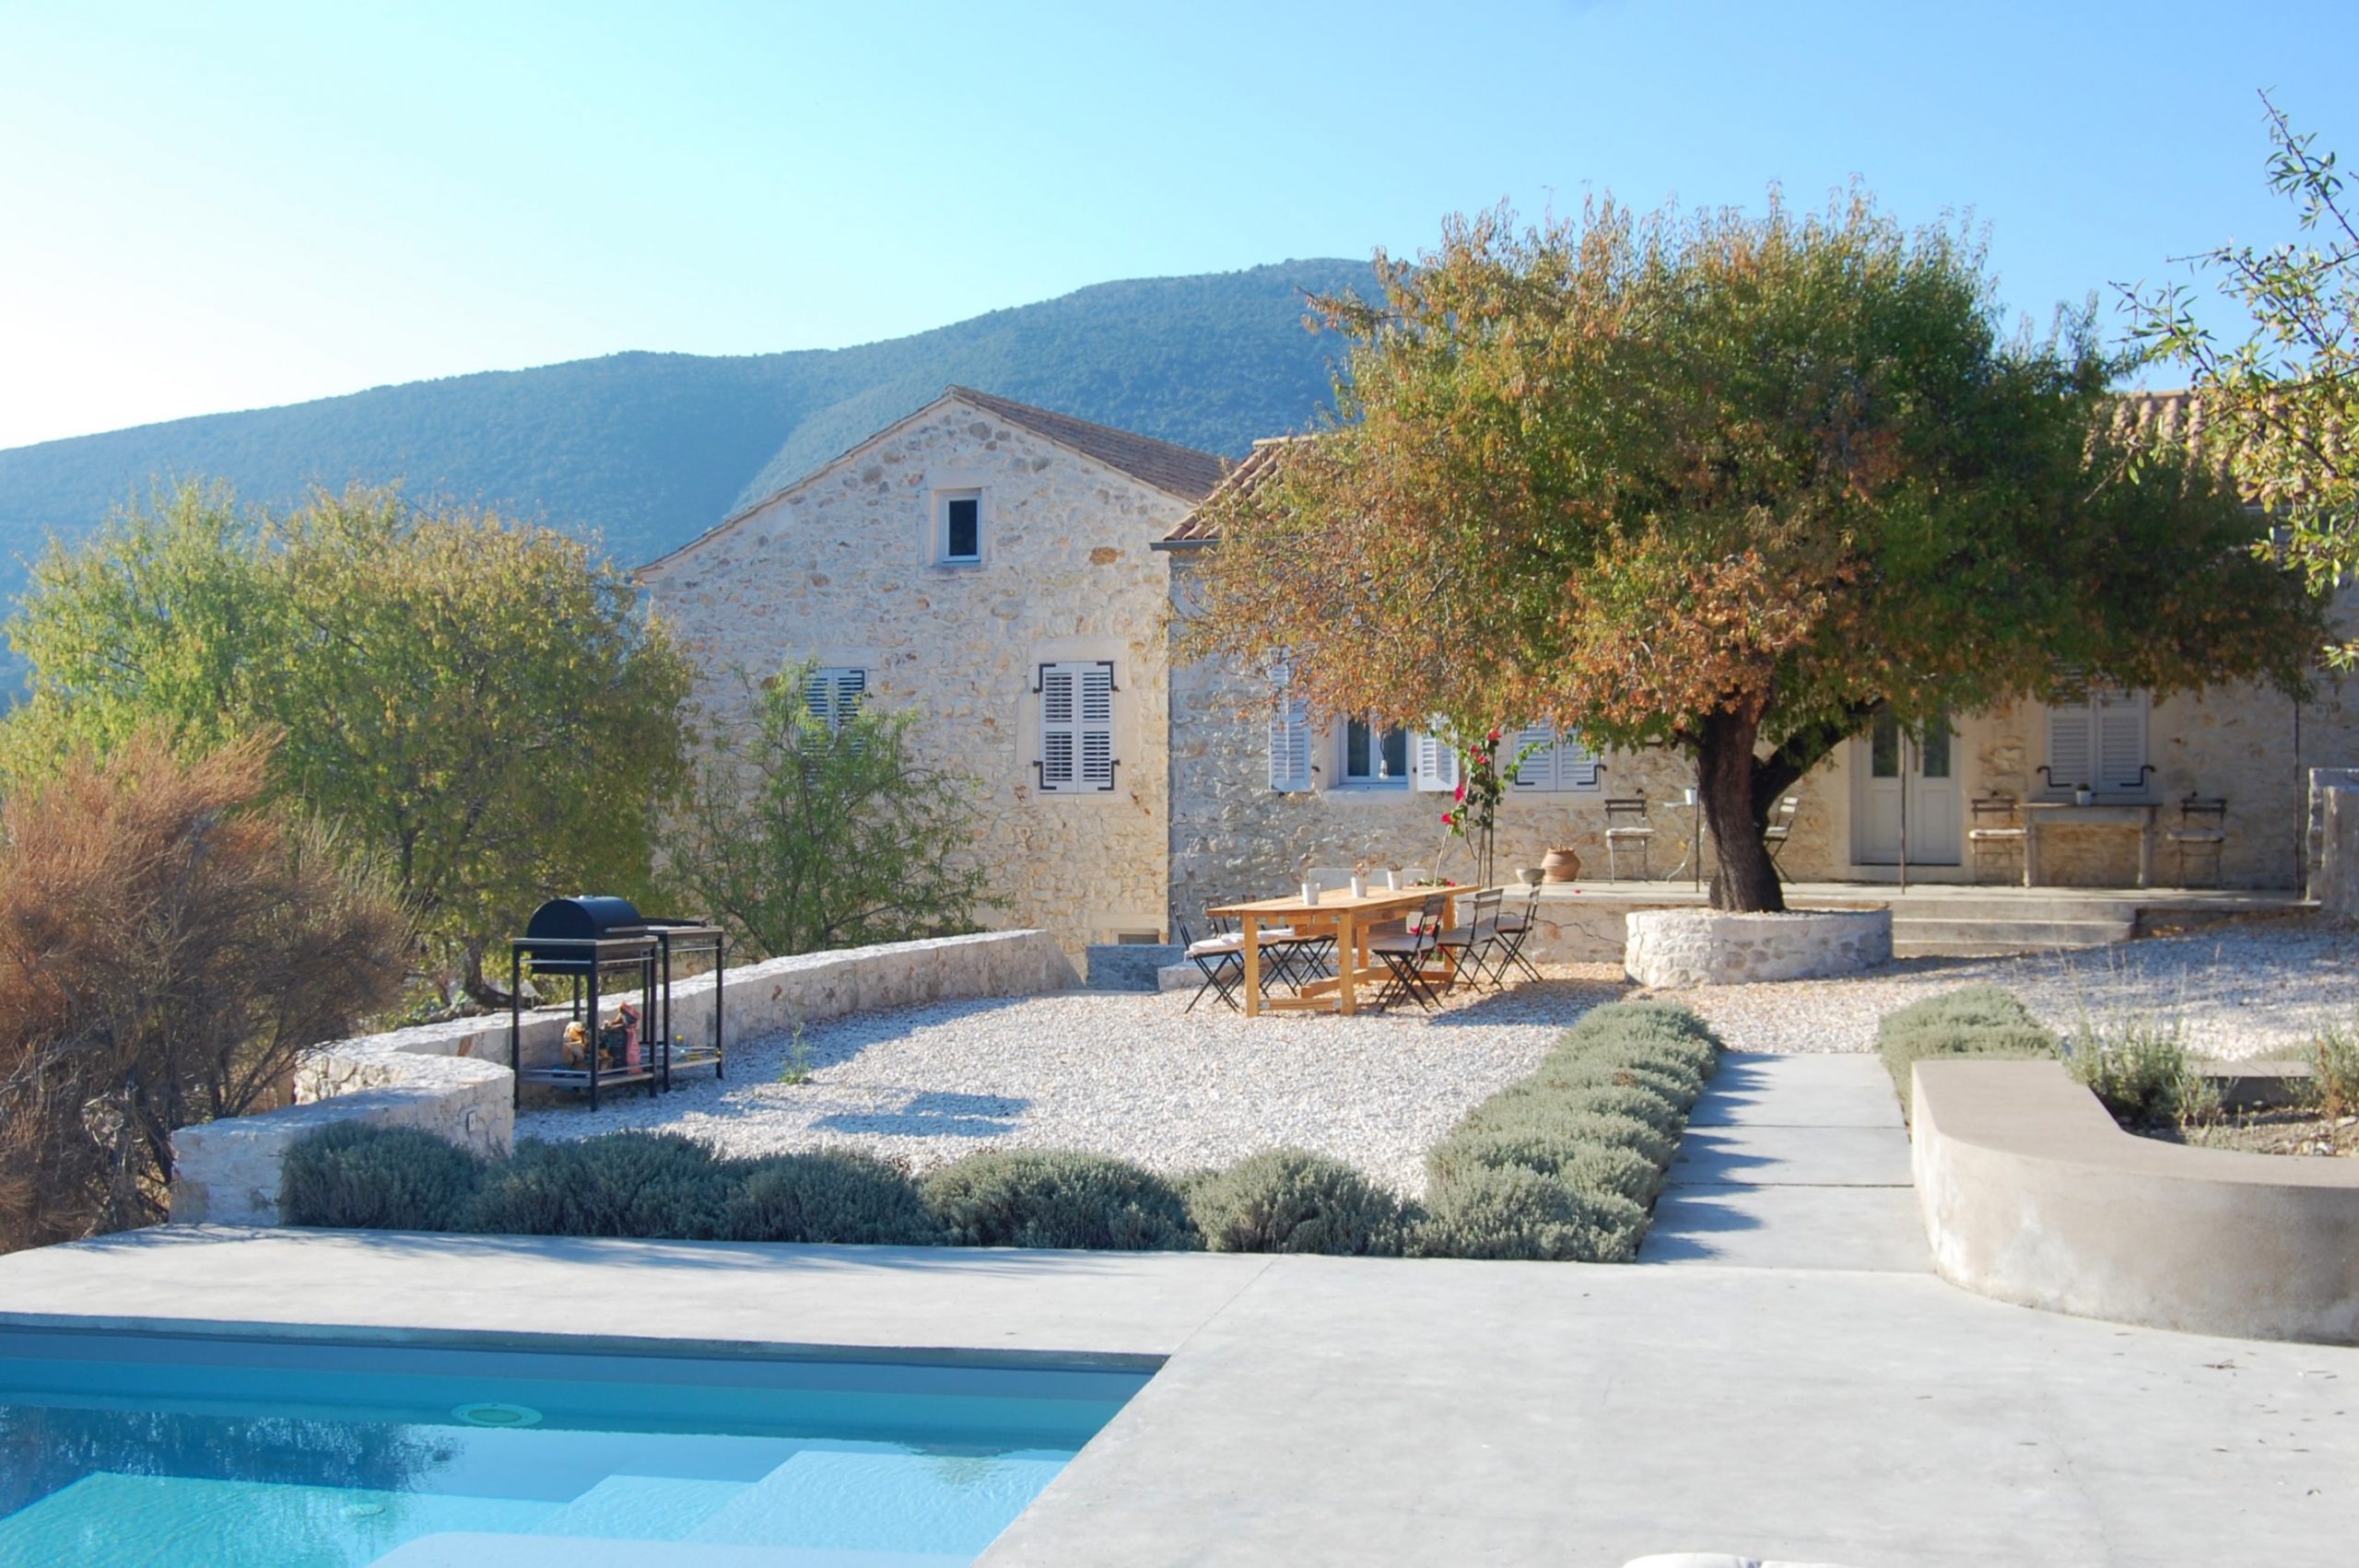 Salt water pool area and entertainment area at Villa Kalos for rent, Ithaca Greece Lahos